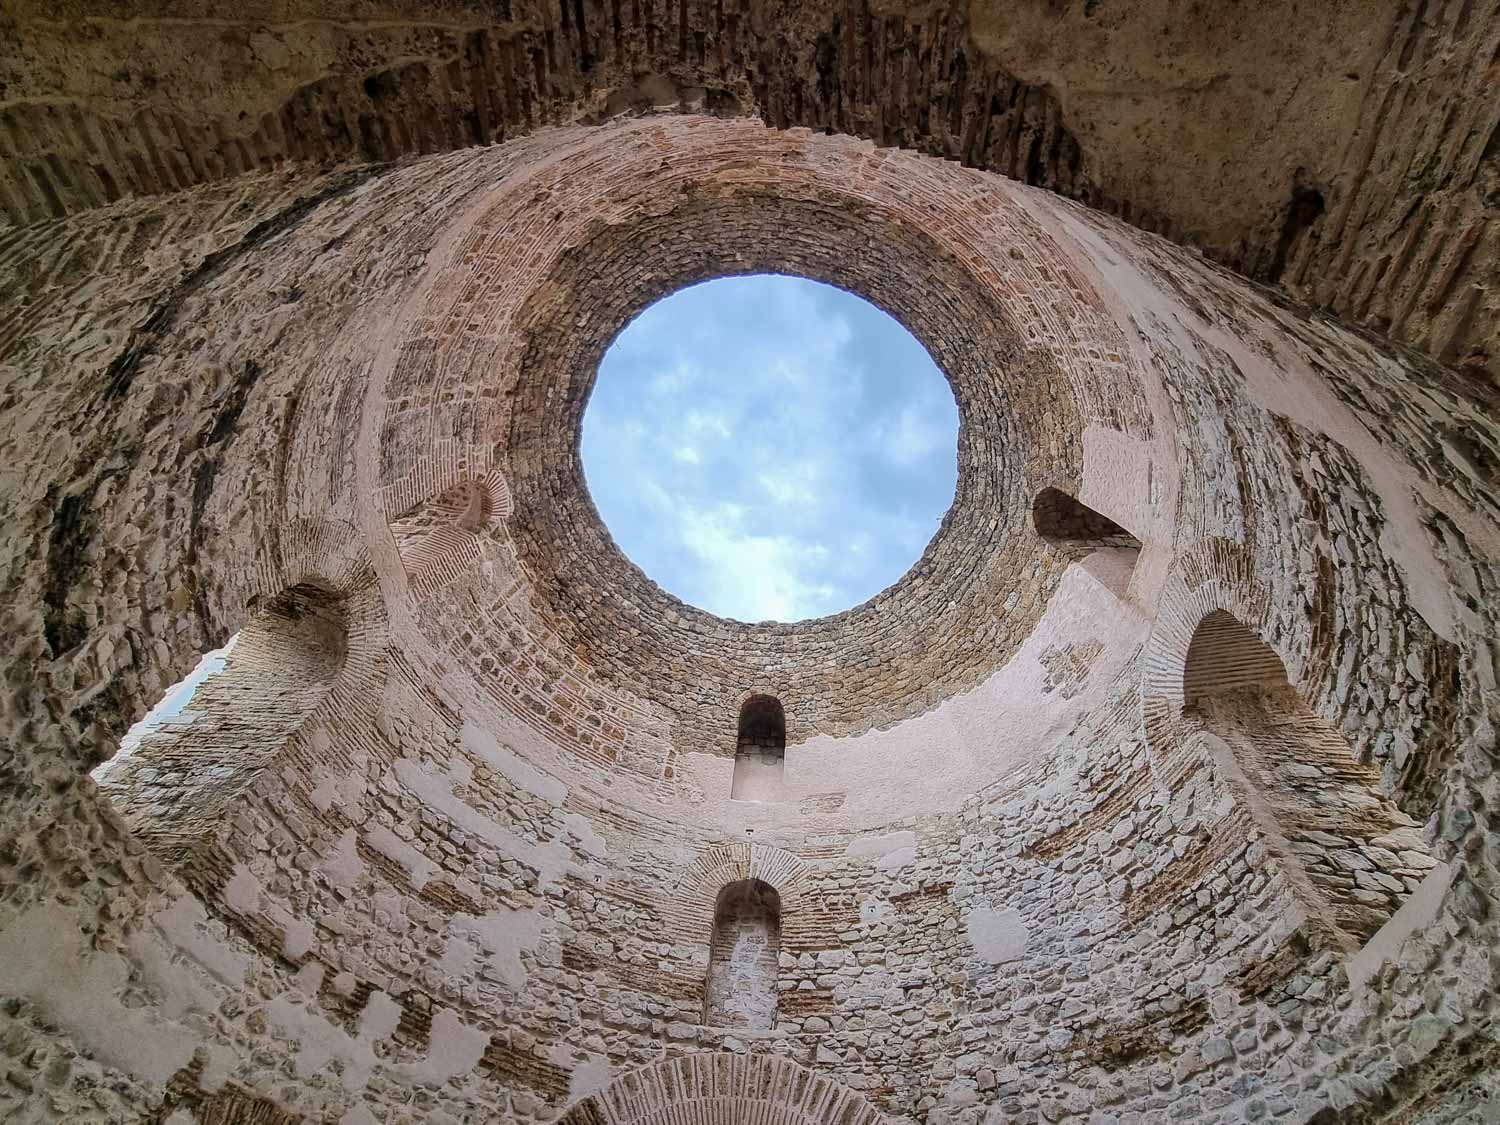 Blue sky seen through the hole in the roof of the Vestibule, part of Diocletian's Palace and one of the best places to visit in Split with kids